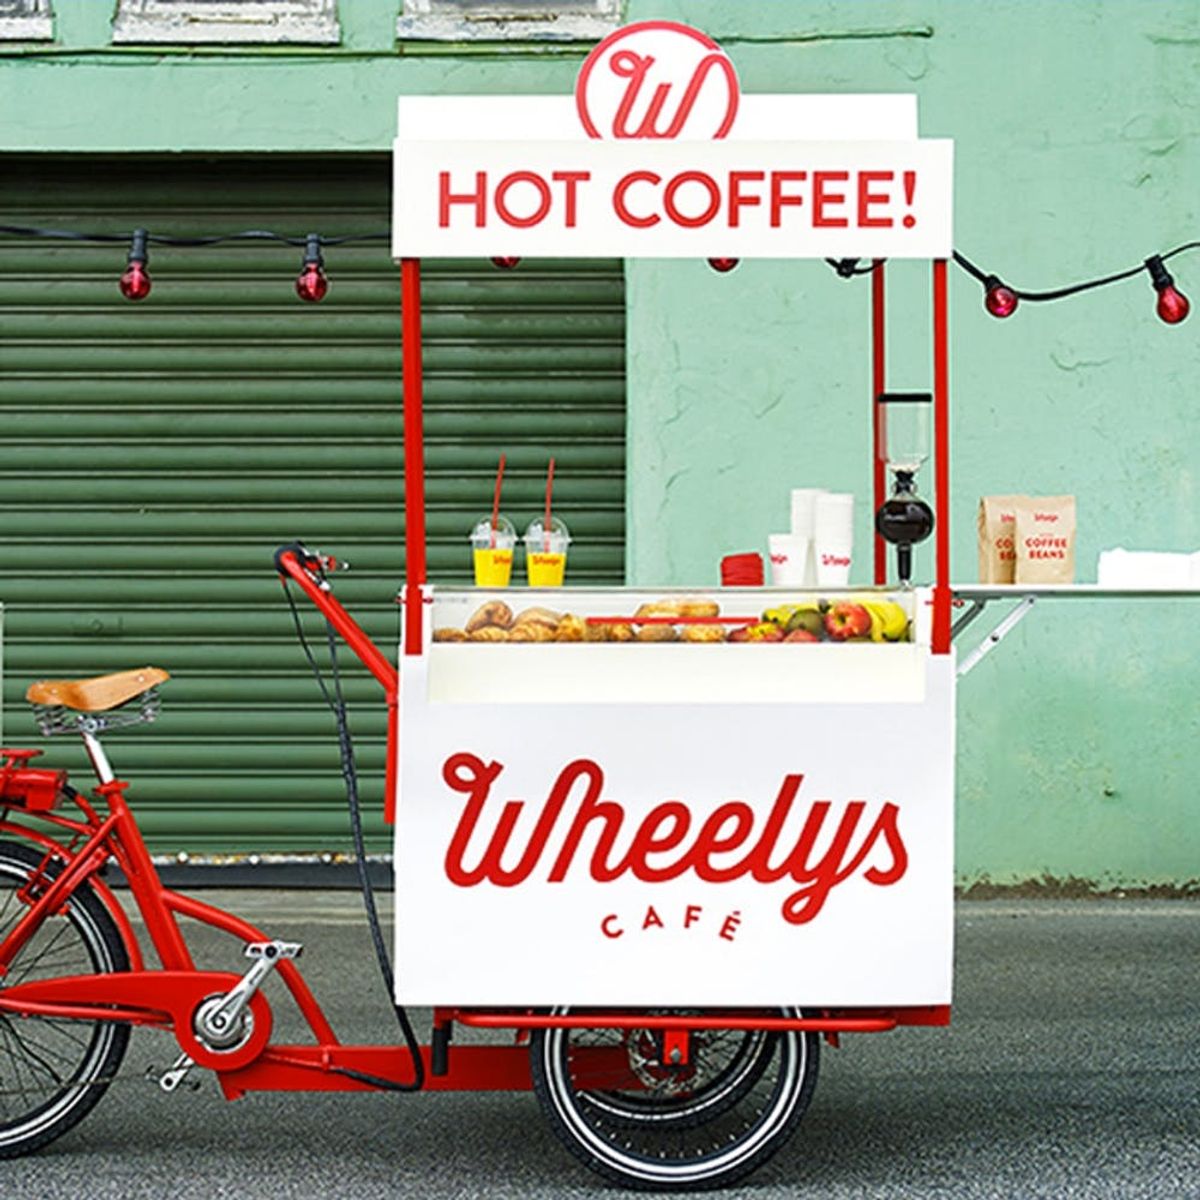 This Bike-Powered Coffee Cart Could Be the Next Big Thing